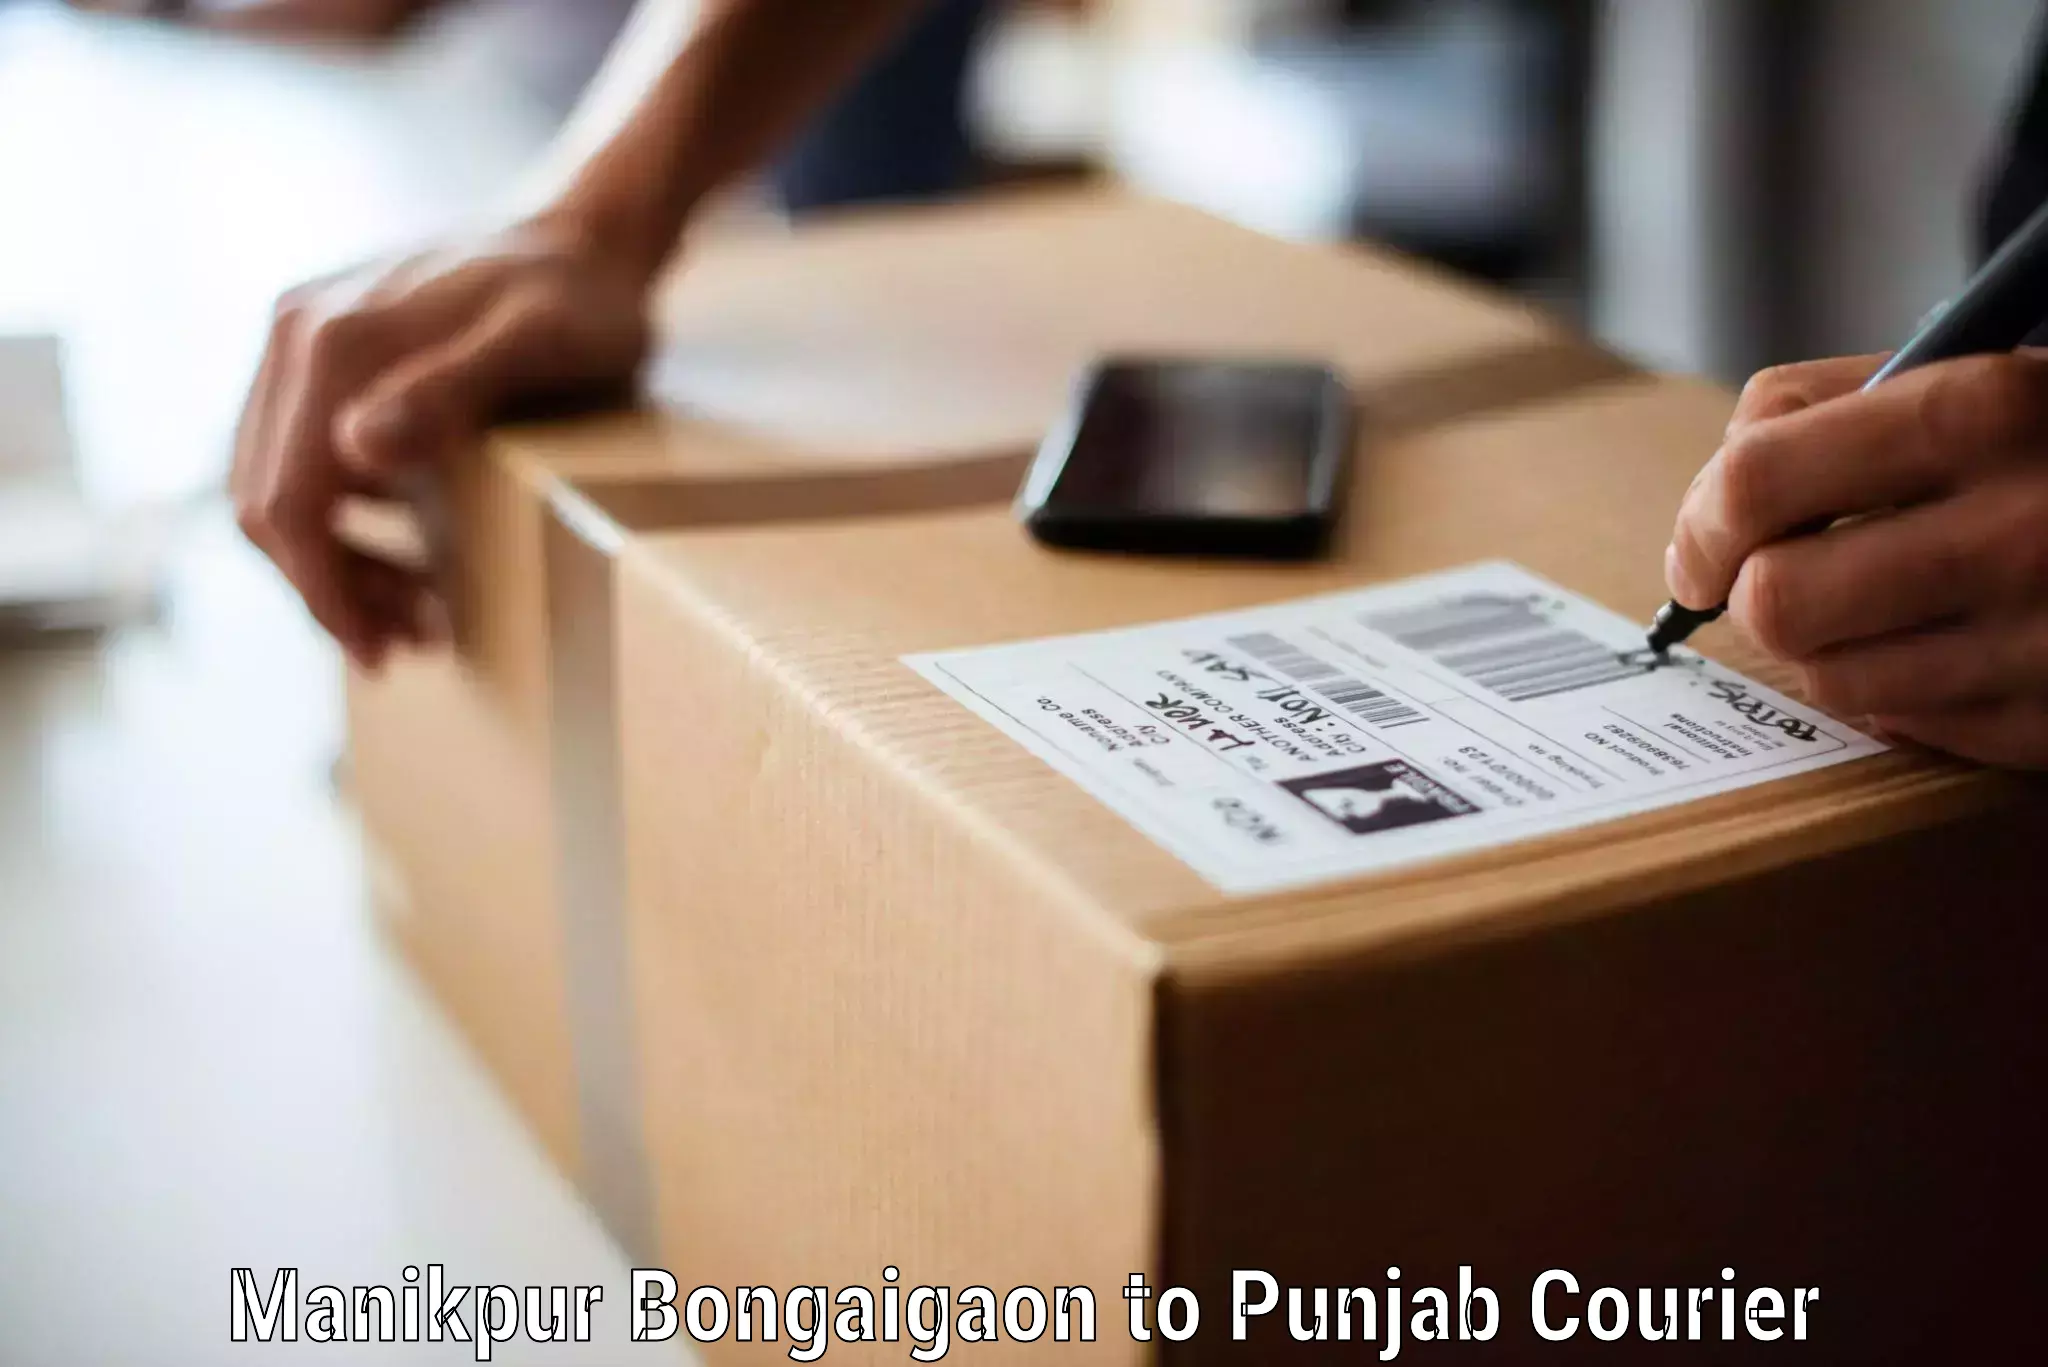 Professional relocation services in Manikpur Bongaigaon to Rajpura